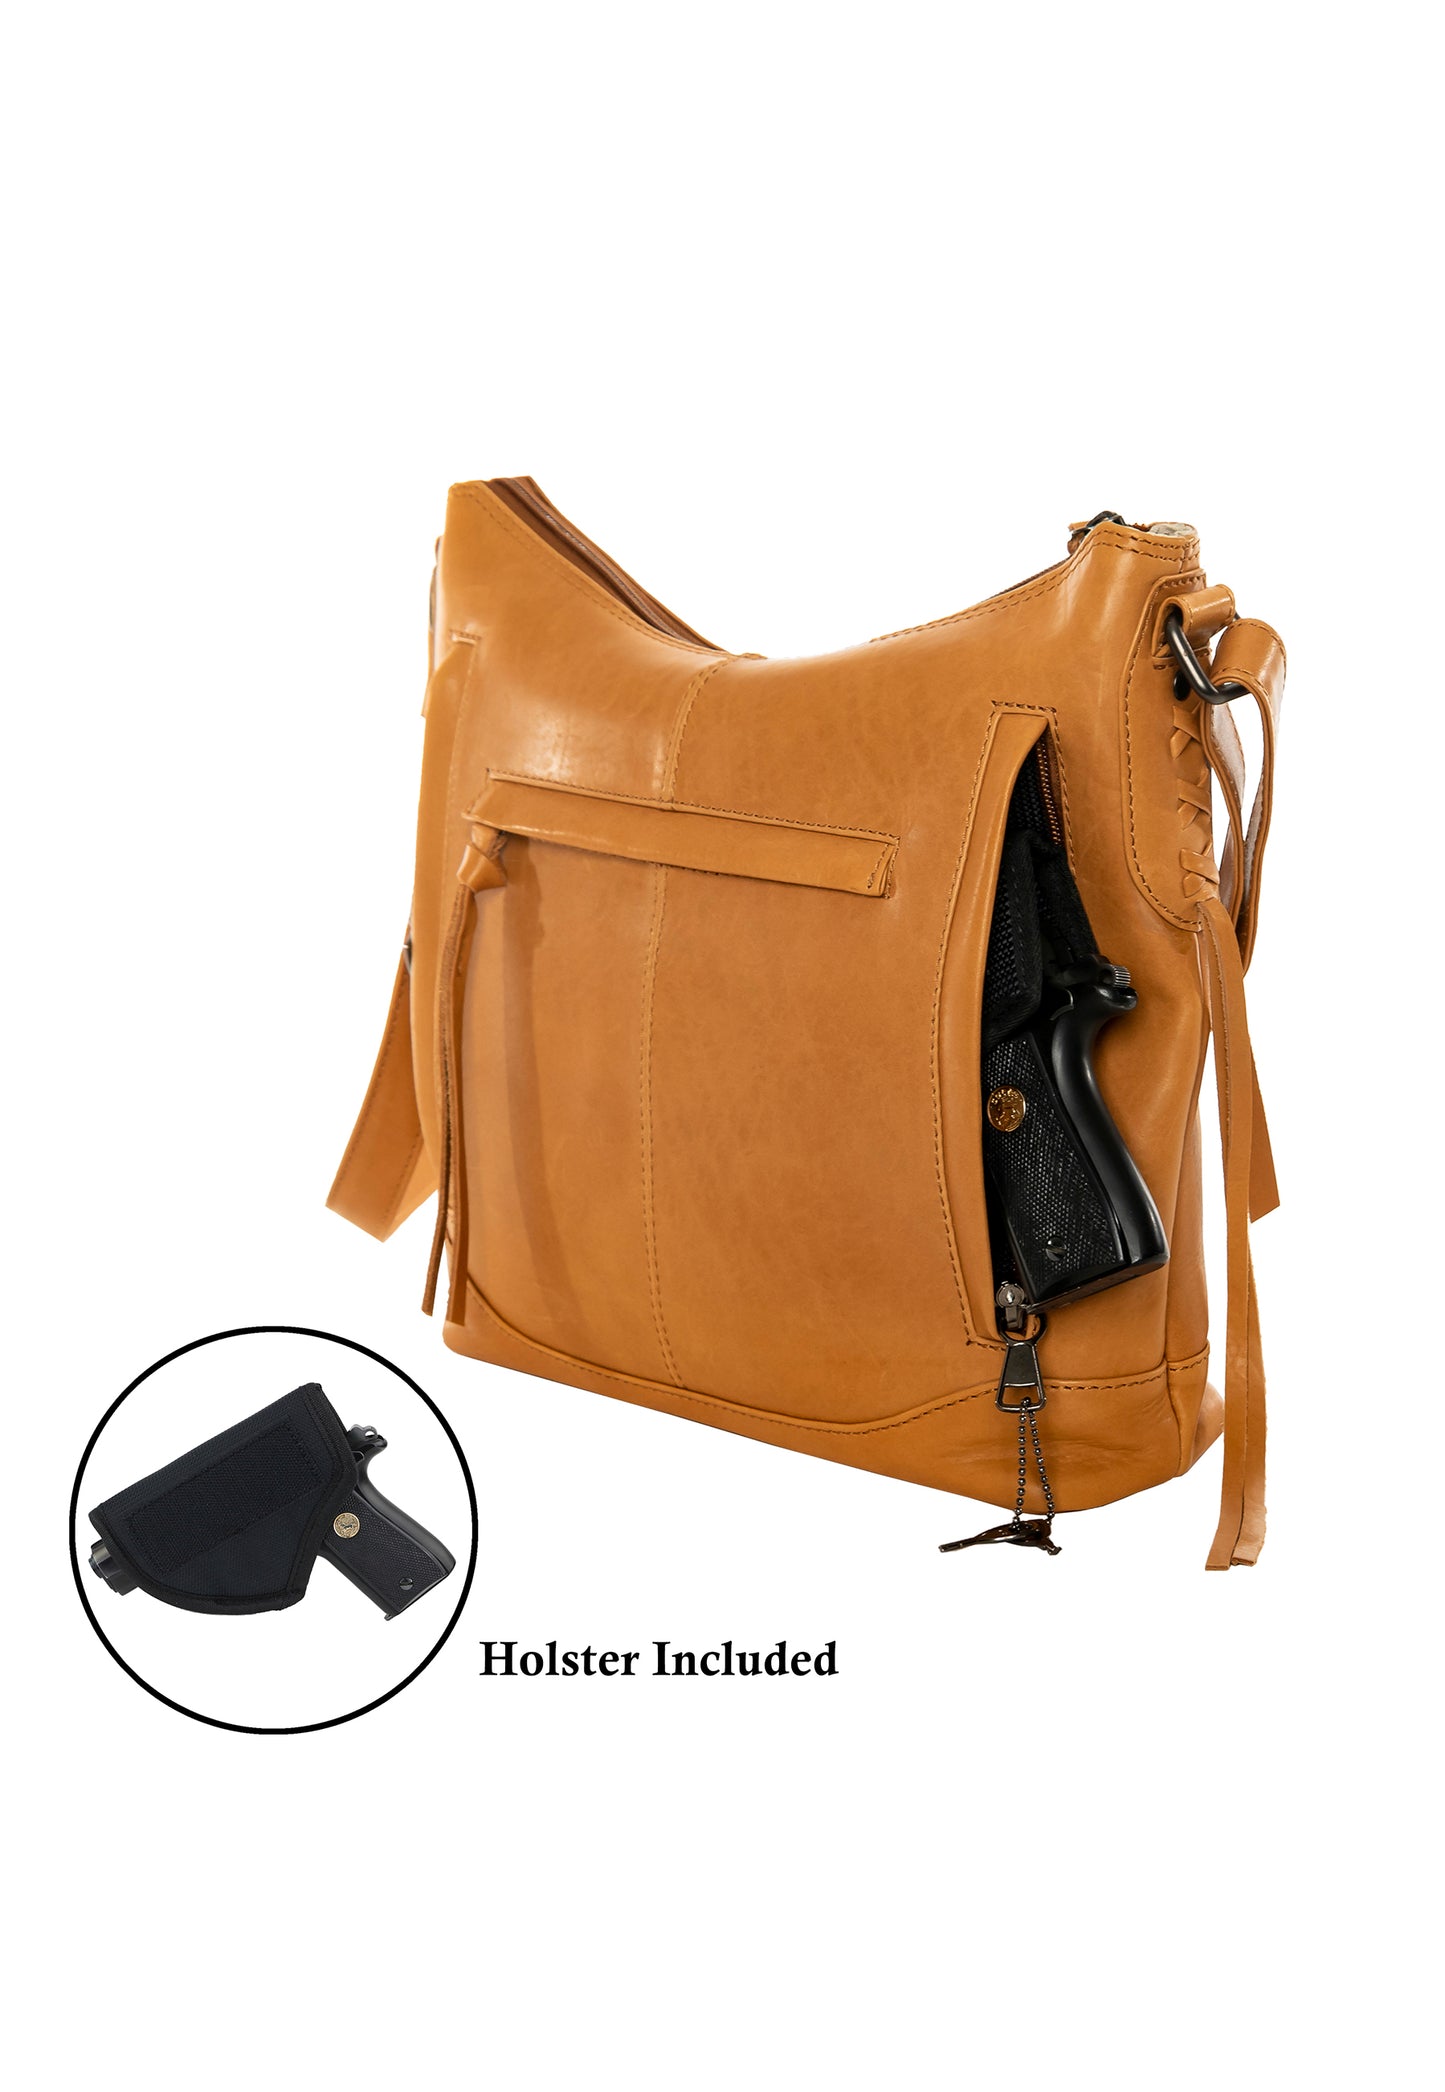 Holster view of leather gun purse